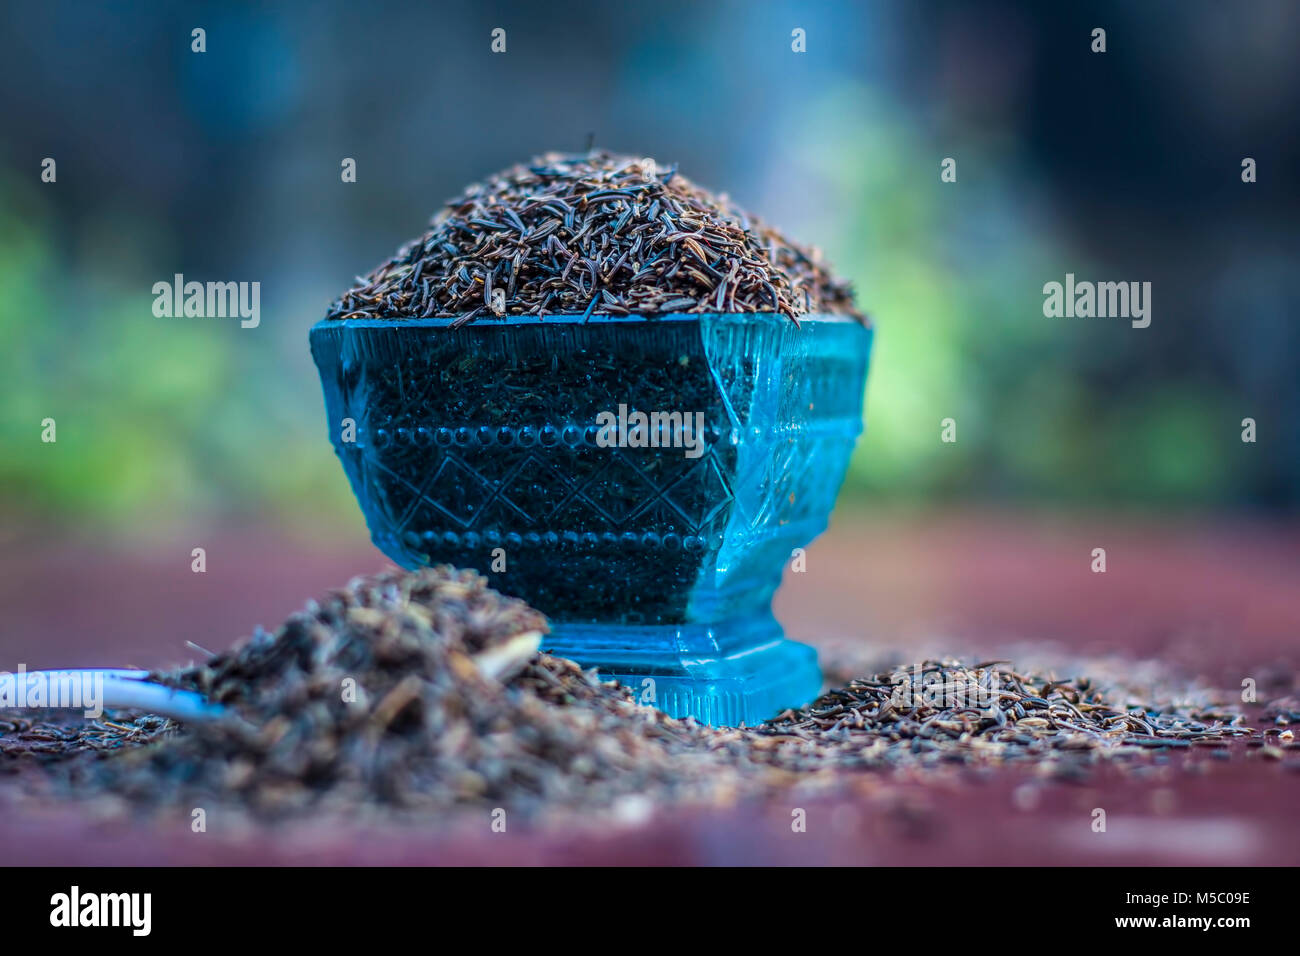 Close up of Shahjerra,Carum carvi,Caraway seeds in a bowl on wooden surface. Stock Photo